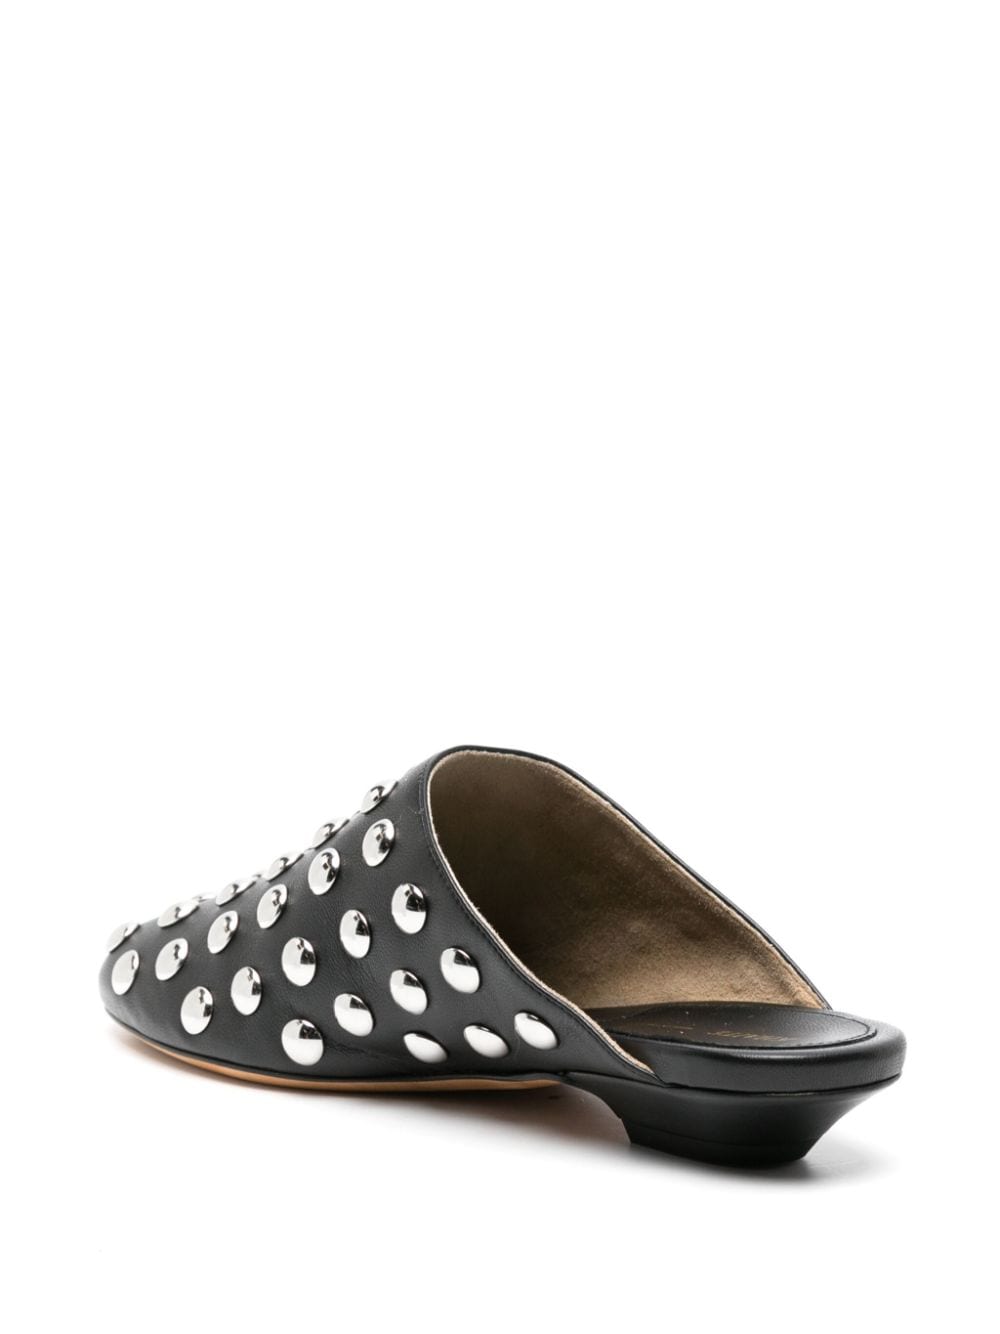 KHAITE Studded Leather Flats for Women with Mirrored Embellishments and Low Stacked Heels